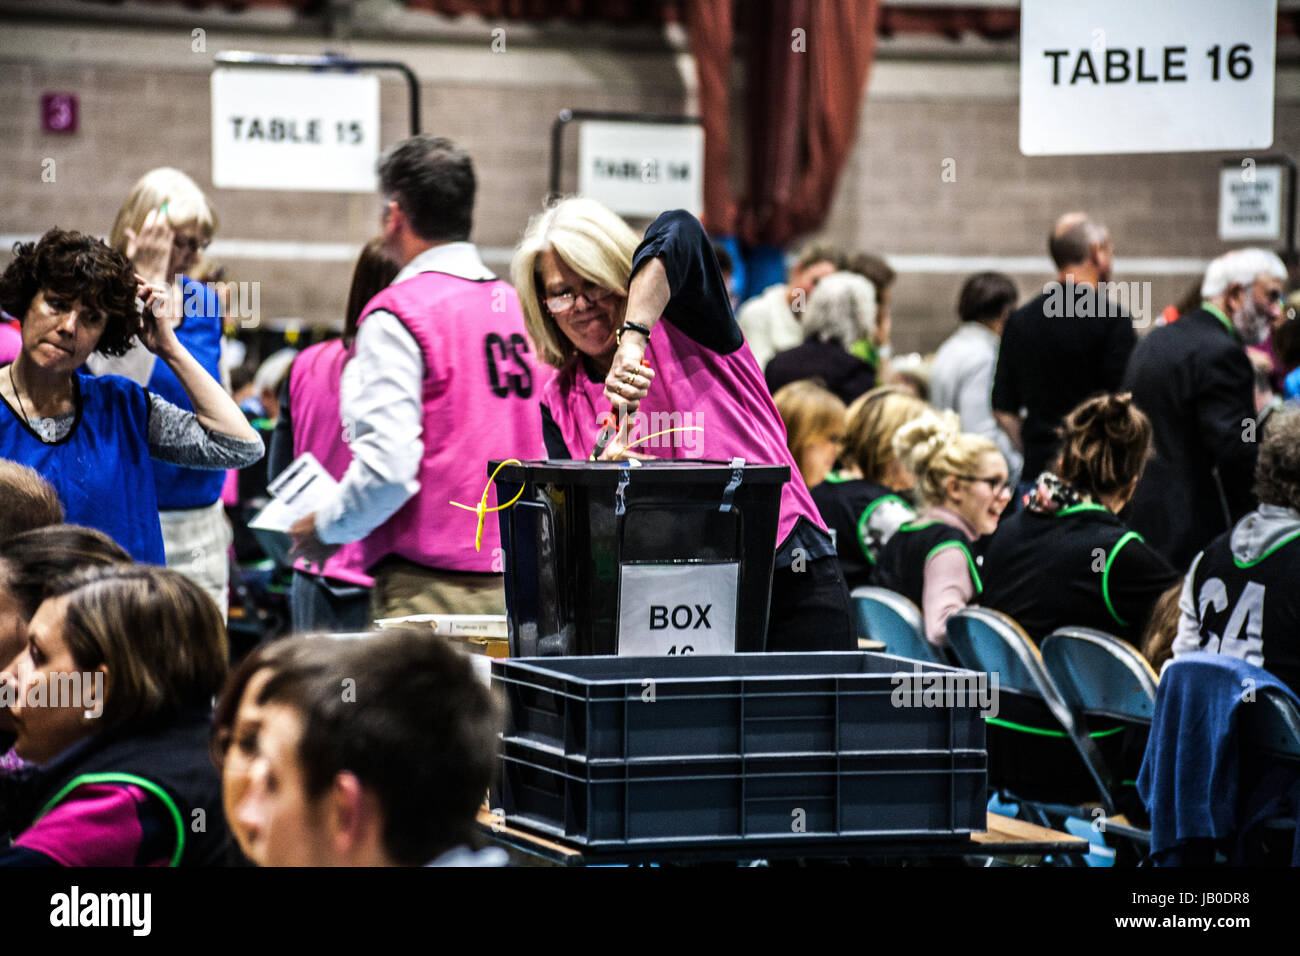 Hereford, UK. 08th June, 2017. A woman breaks the seals on a ballot box. The counting of votes is underway in Hereford. The latest opinion polls suggest British Prime Minister Theresa May's Conservative Party is on course to win today's national election comfortably. May called the election in April less than a year after she became prime minister in the political turmoil that followed Britain's vote to leave the European Union. Saying she wanted to go into the Brexit negotiations with a position of strength. Credit: Jim Wood/Alamy Live News Stock Photo